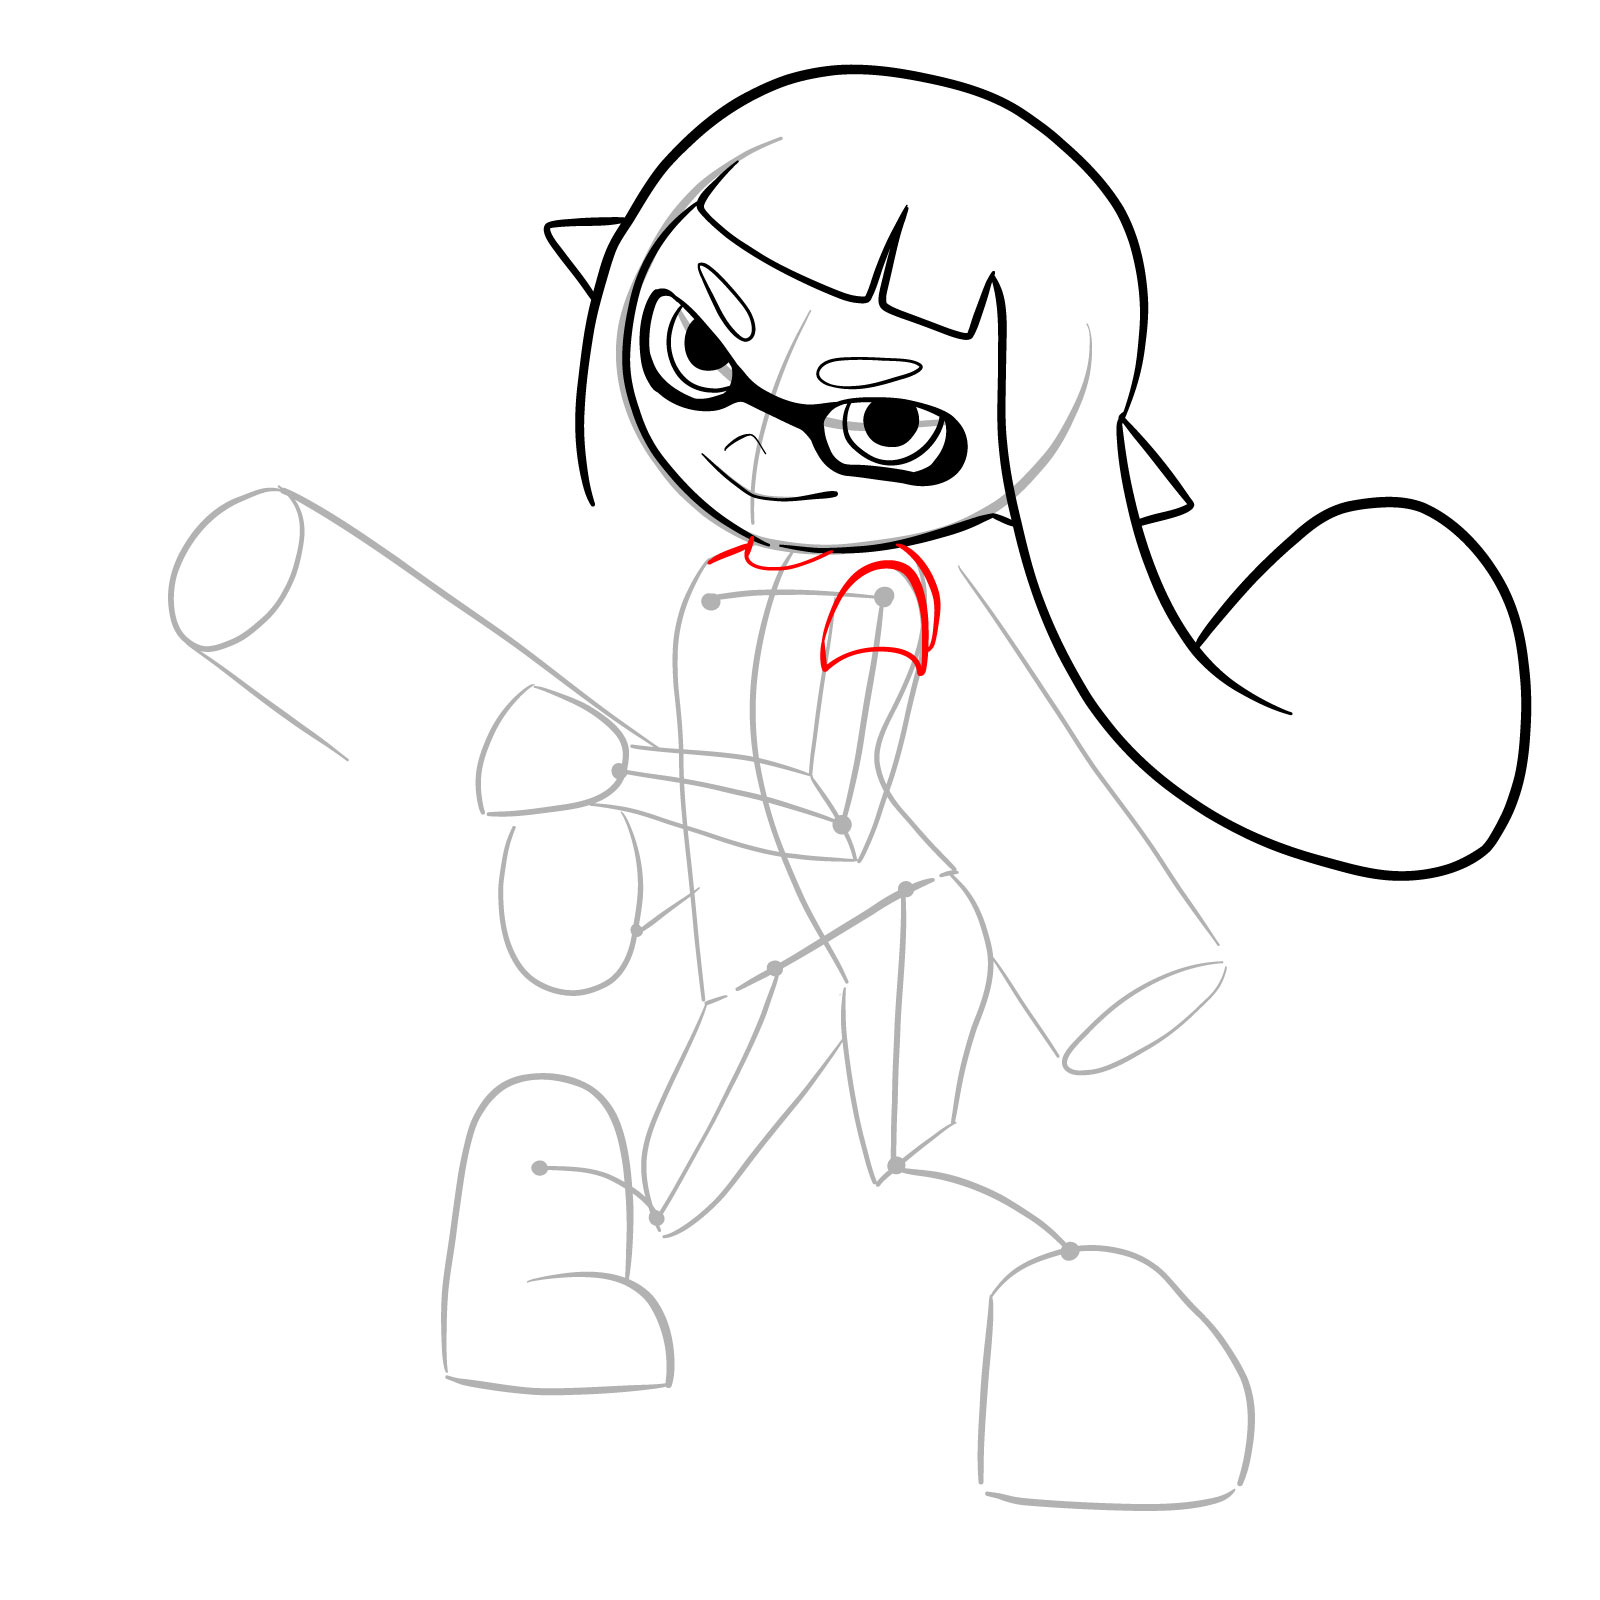 How to draw an Inkling Girl - step 12